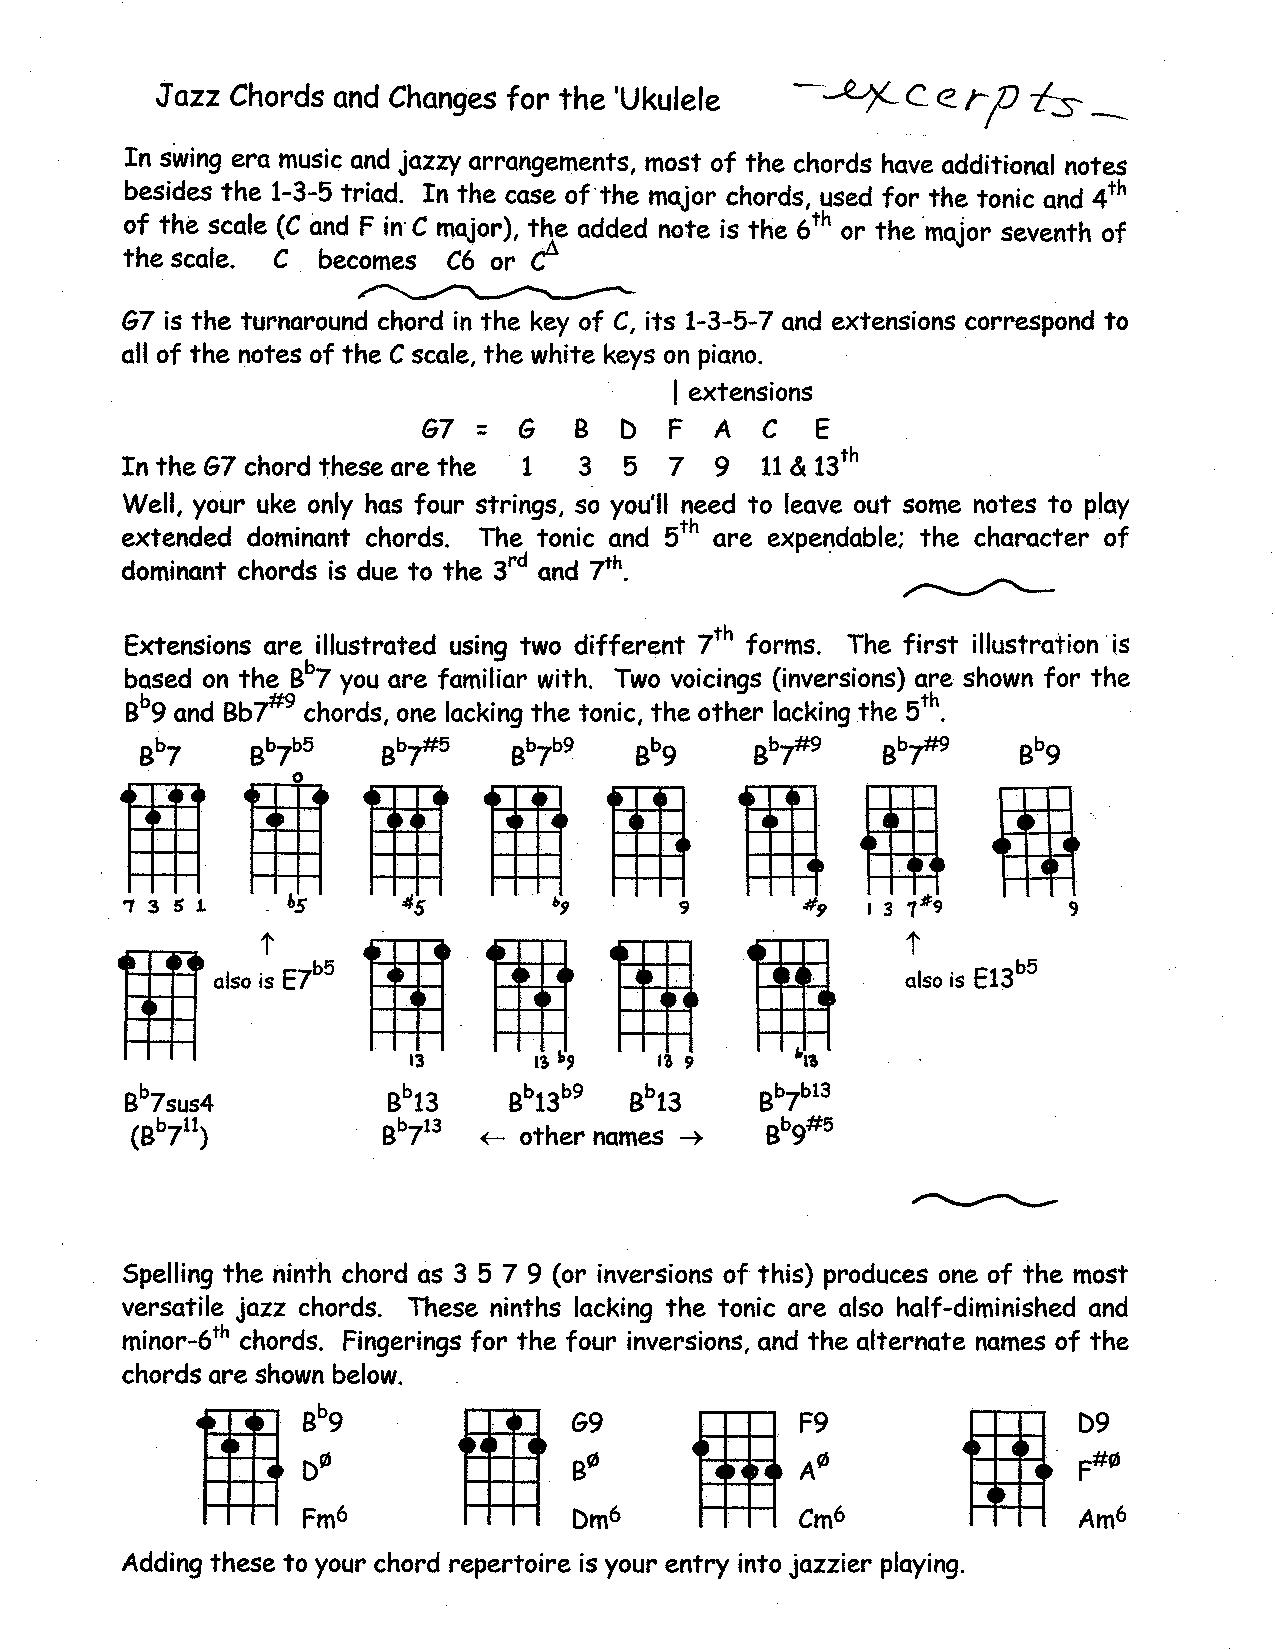 Jazz Chords and changes - page 1